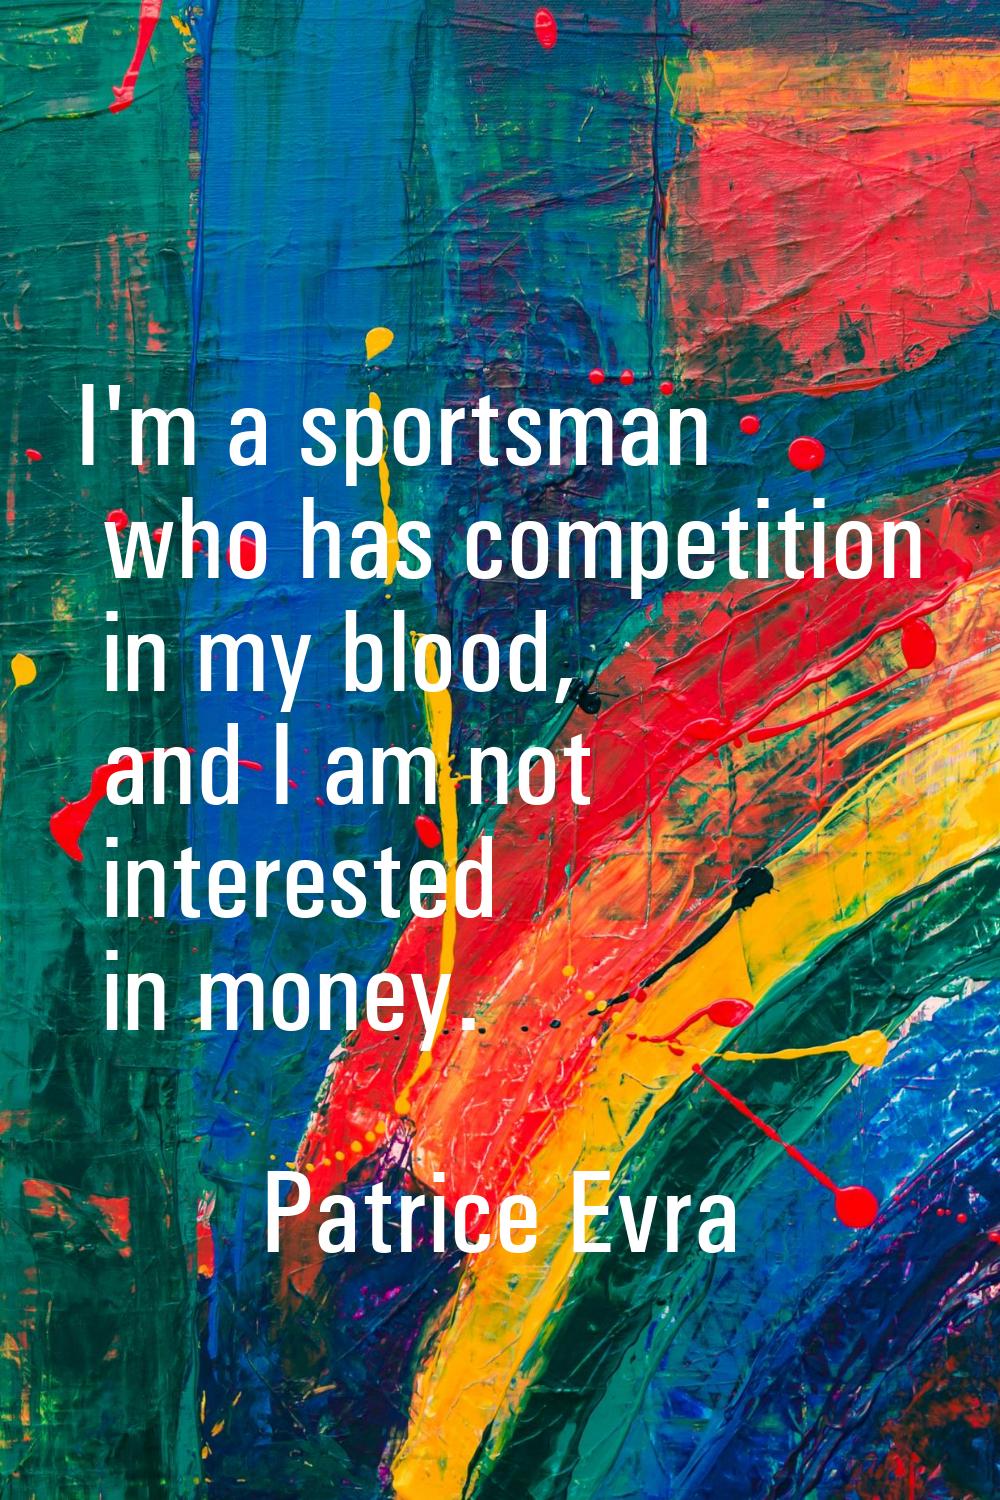 I'm a sportsman who has competition in my blood, and I am not interested in money.